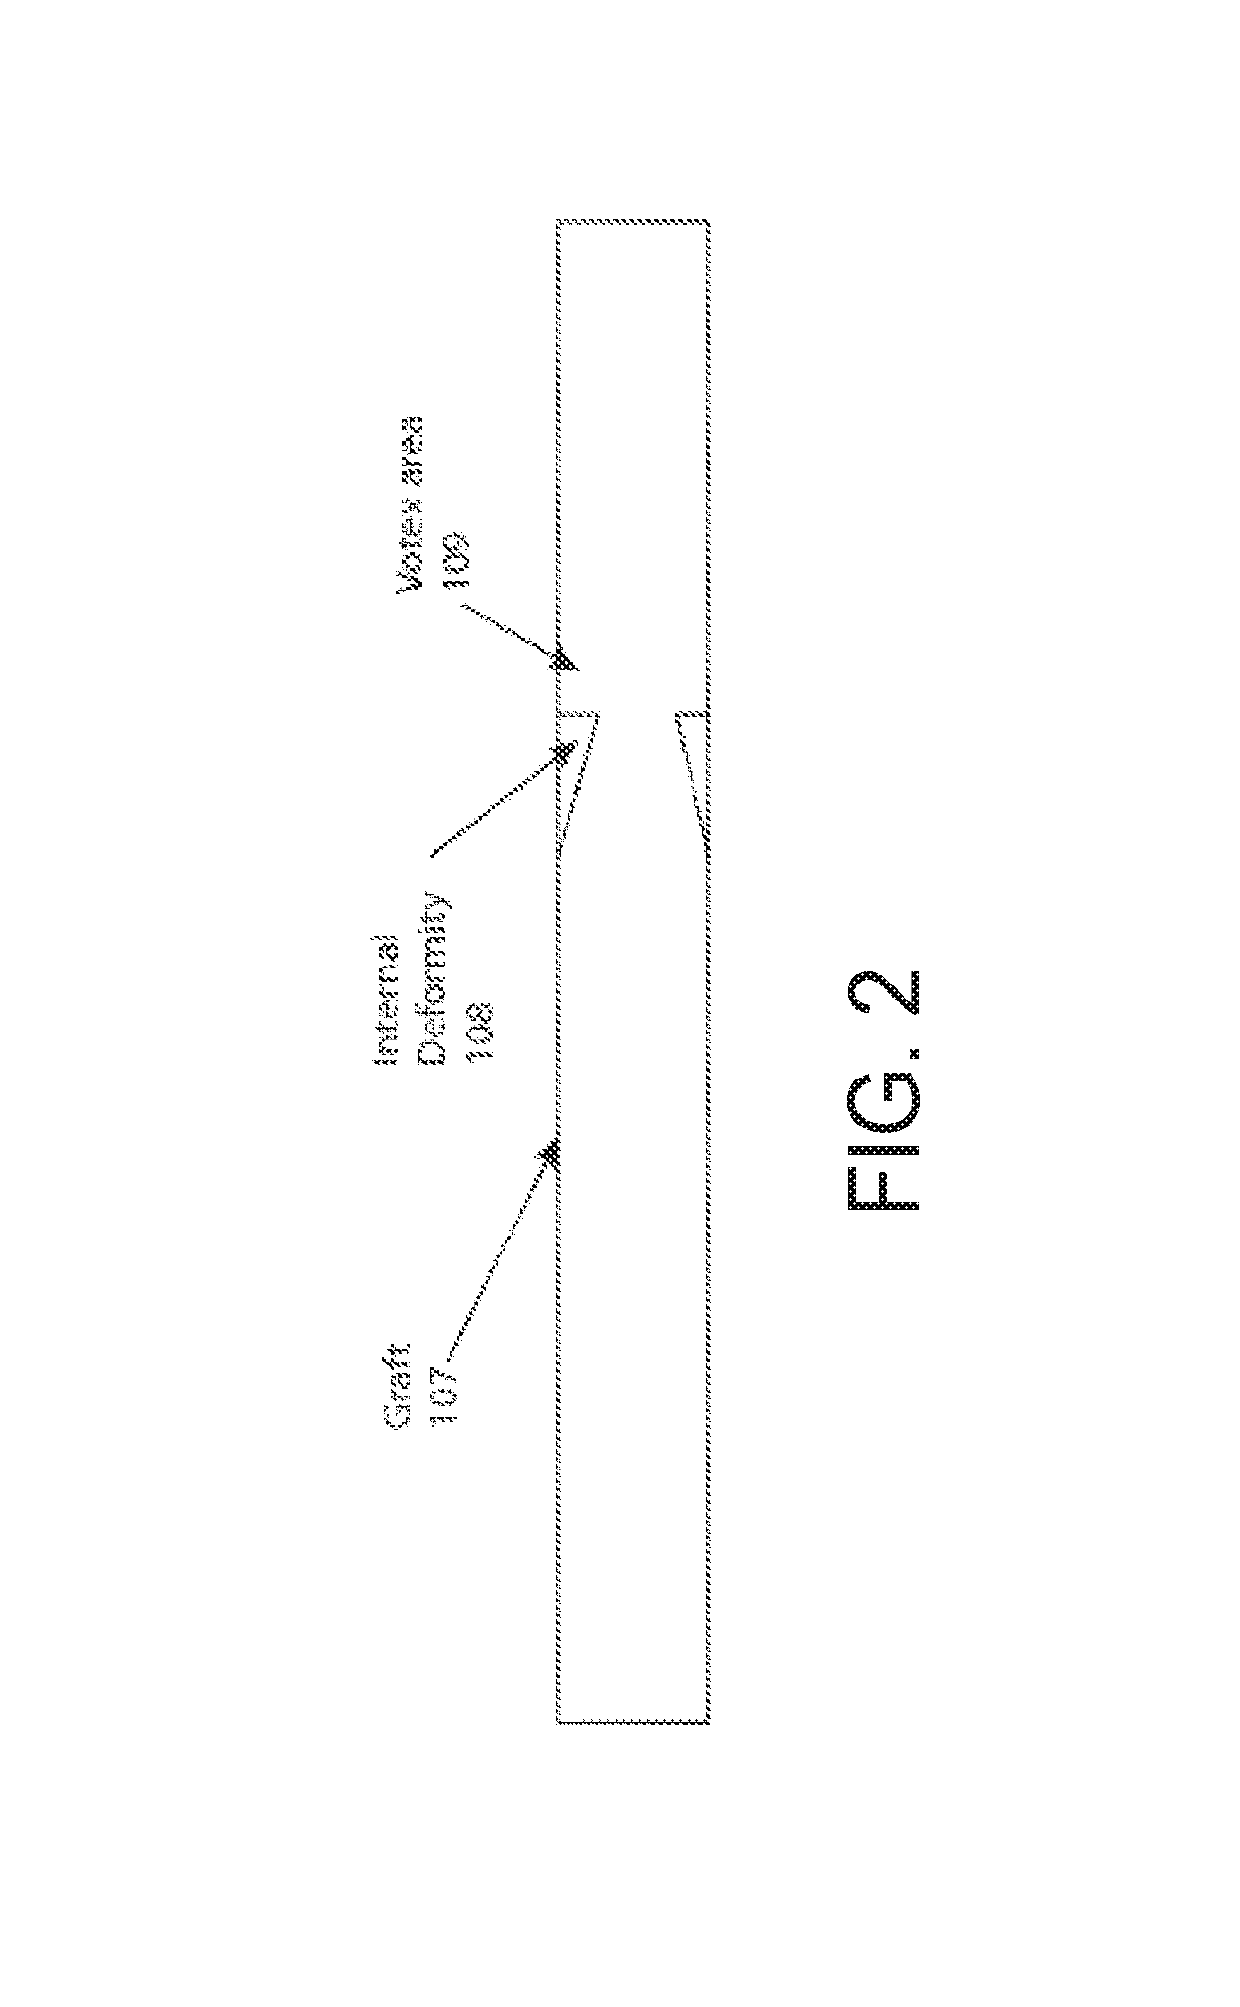 Graft anchor devices, systems and methods